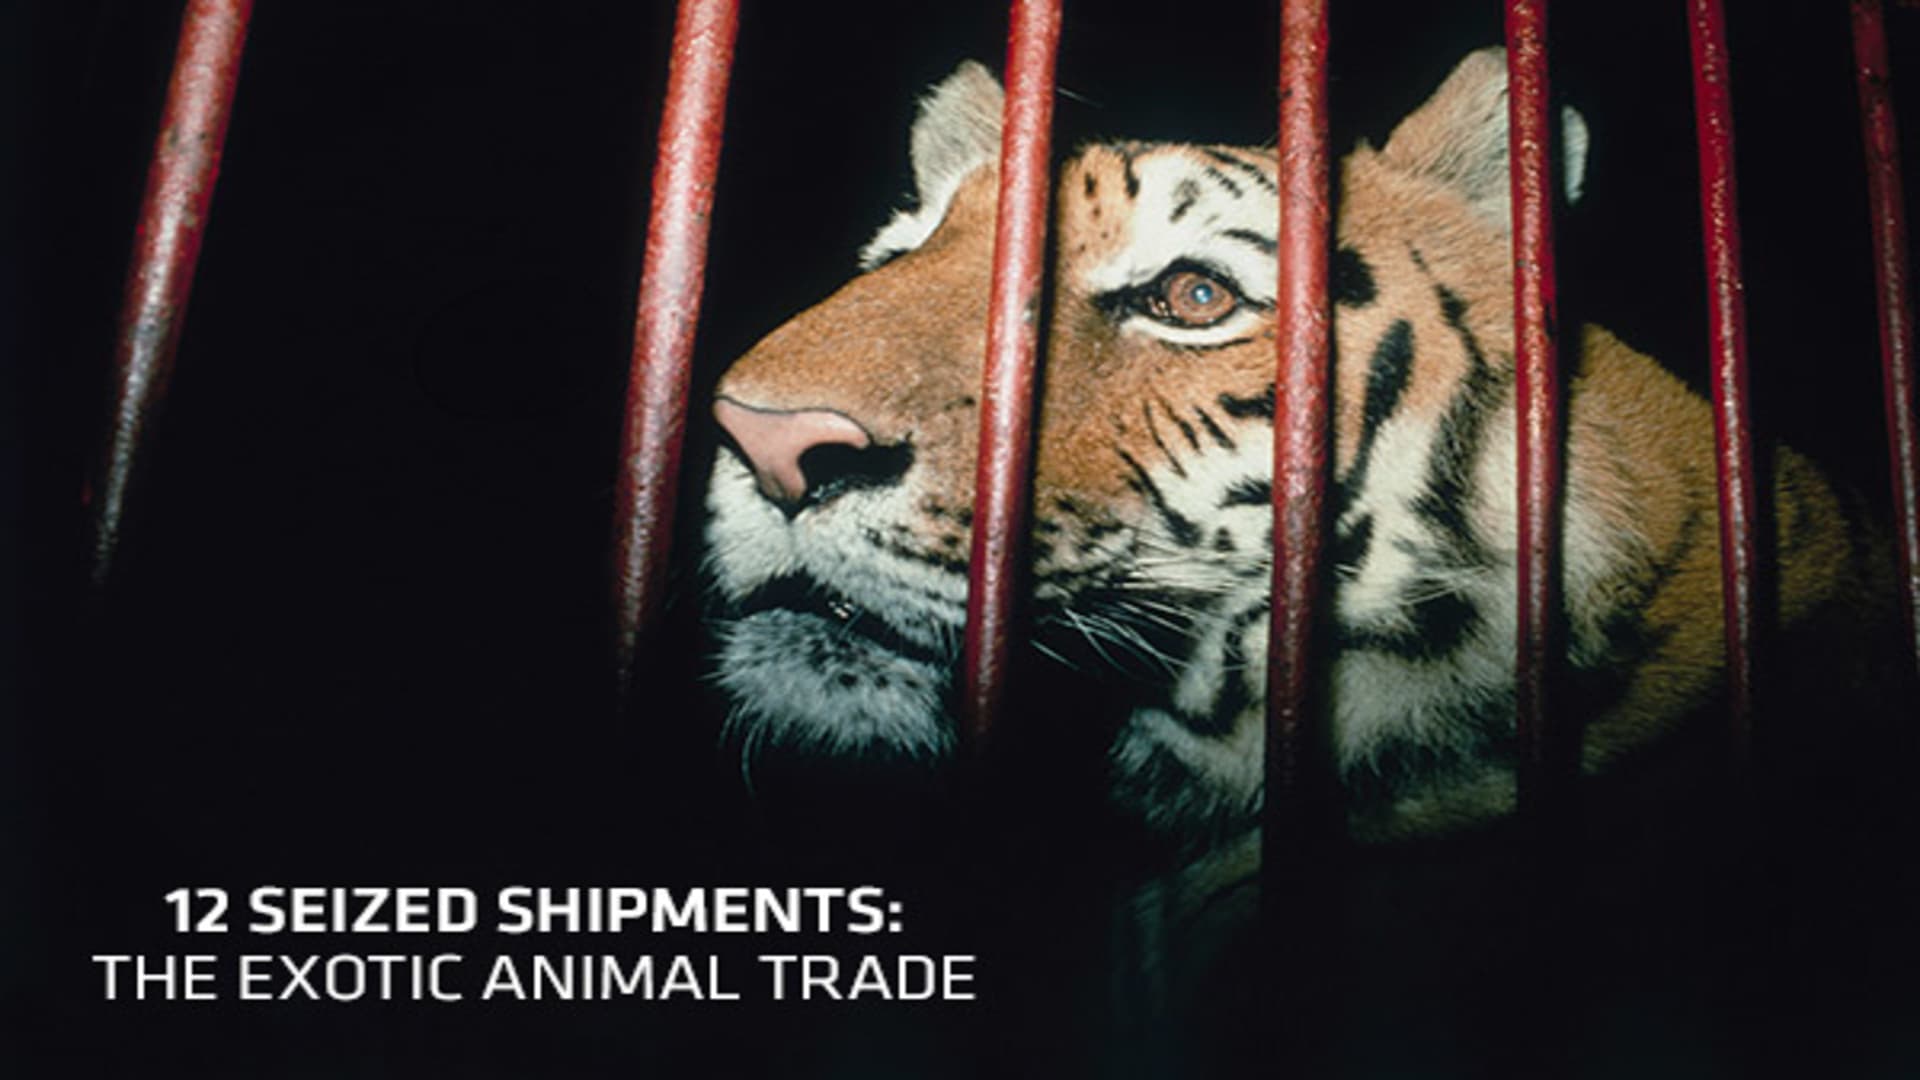 12 Seized Shipments: The Exotic Animal Trade